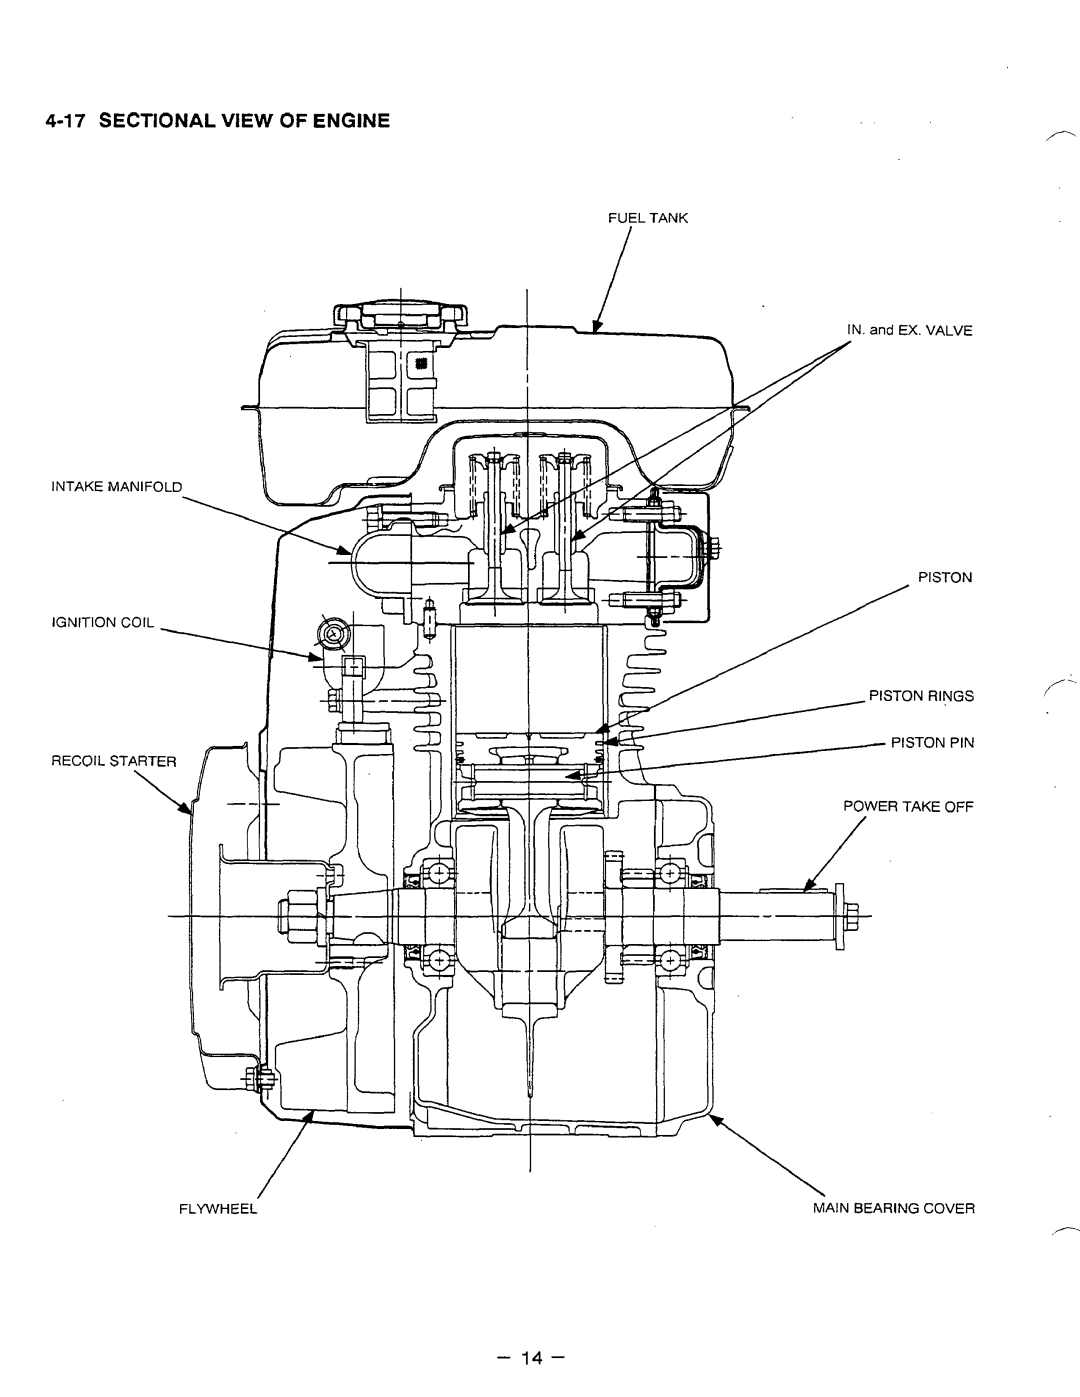 Subaru Robin Power Products EH12-2, EH17-2, EH25-2 manual Sectional View Of Engine, Fuel Tank, Flywheel, Main Bearing Cover 